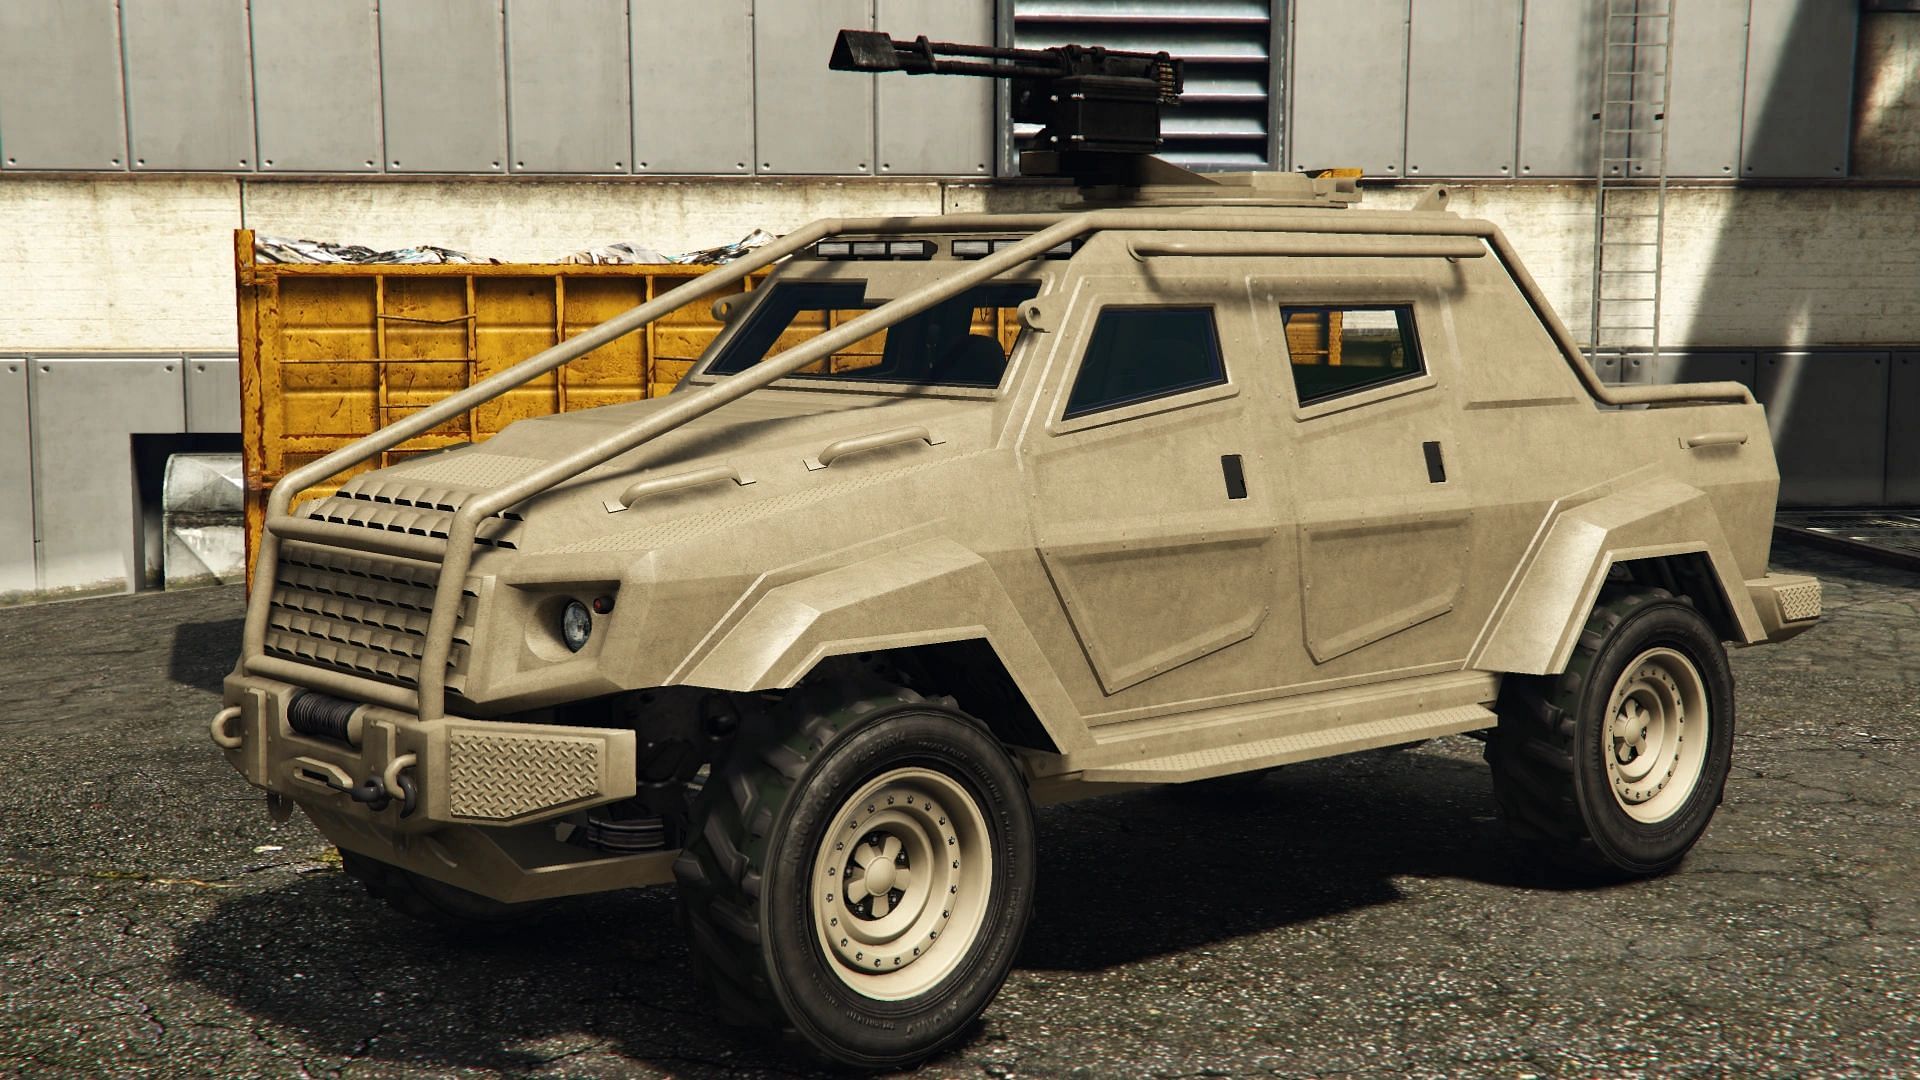 The Insurgent could become one of the cheapest vehicles in GTA 6. (Image via Rockstar Games || GTA Wiki/Camilo Flores)